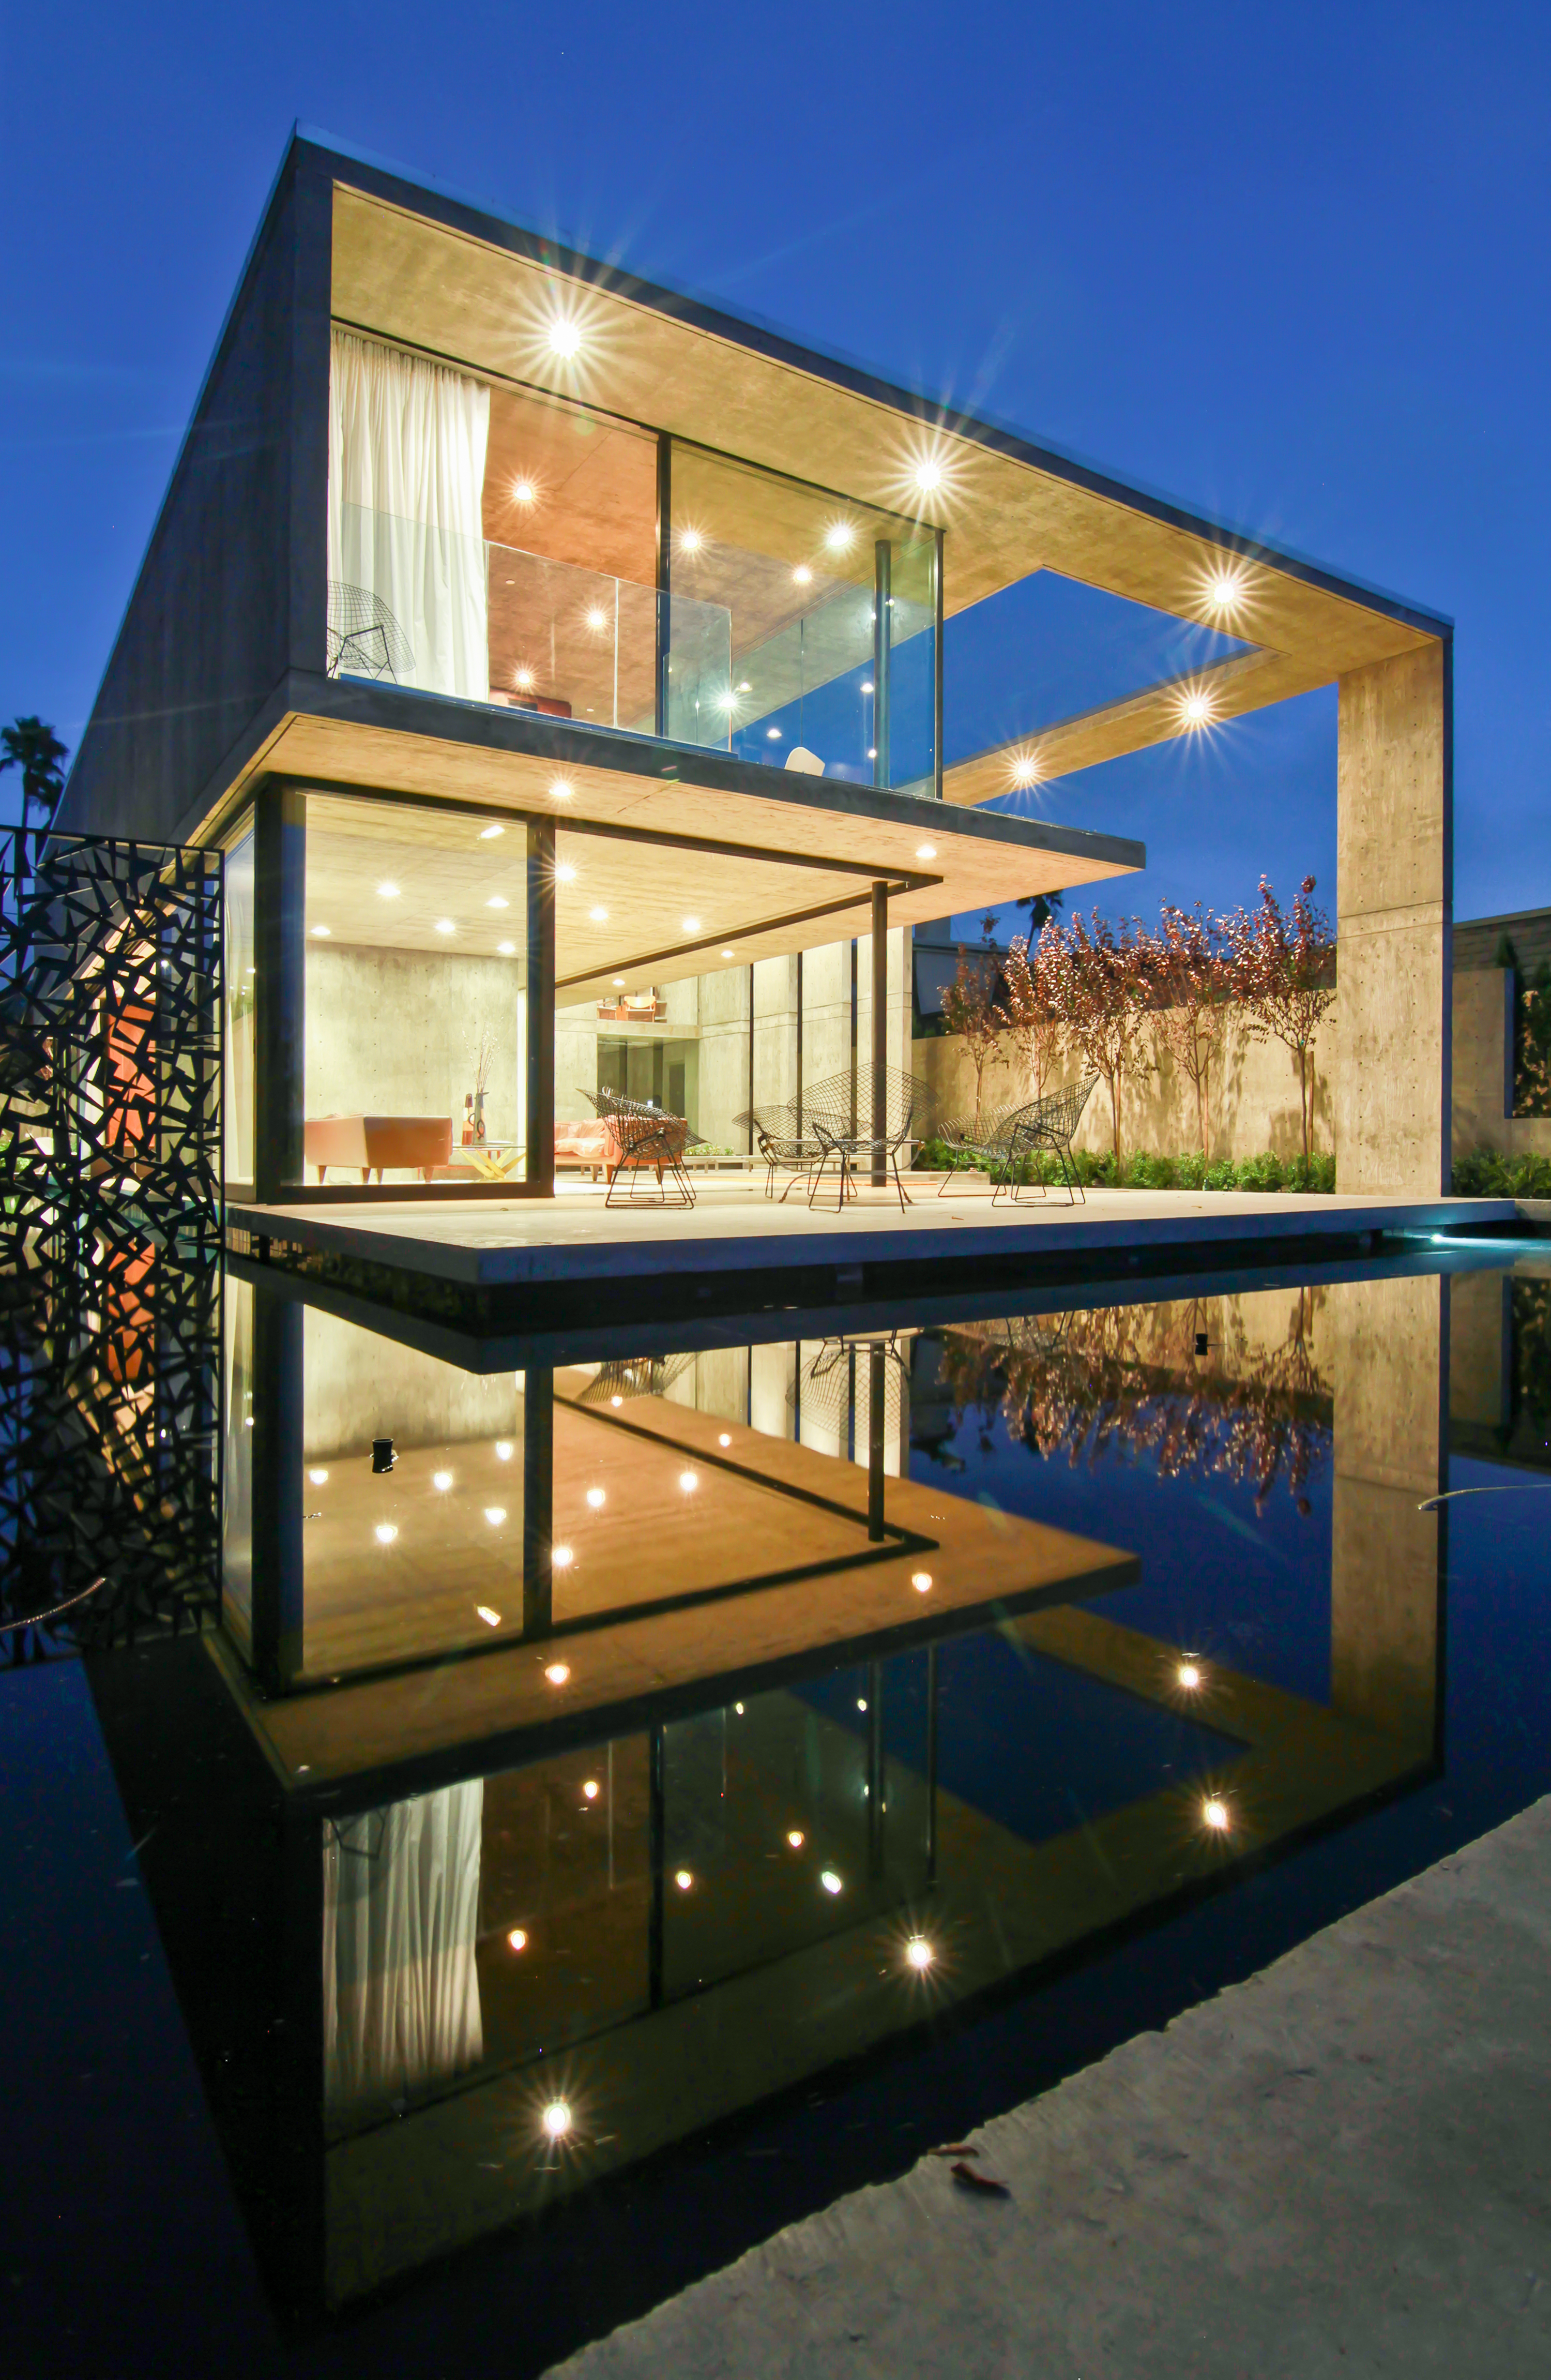 Designer house at night, lit up, surrounded by water